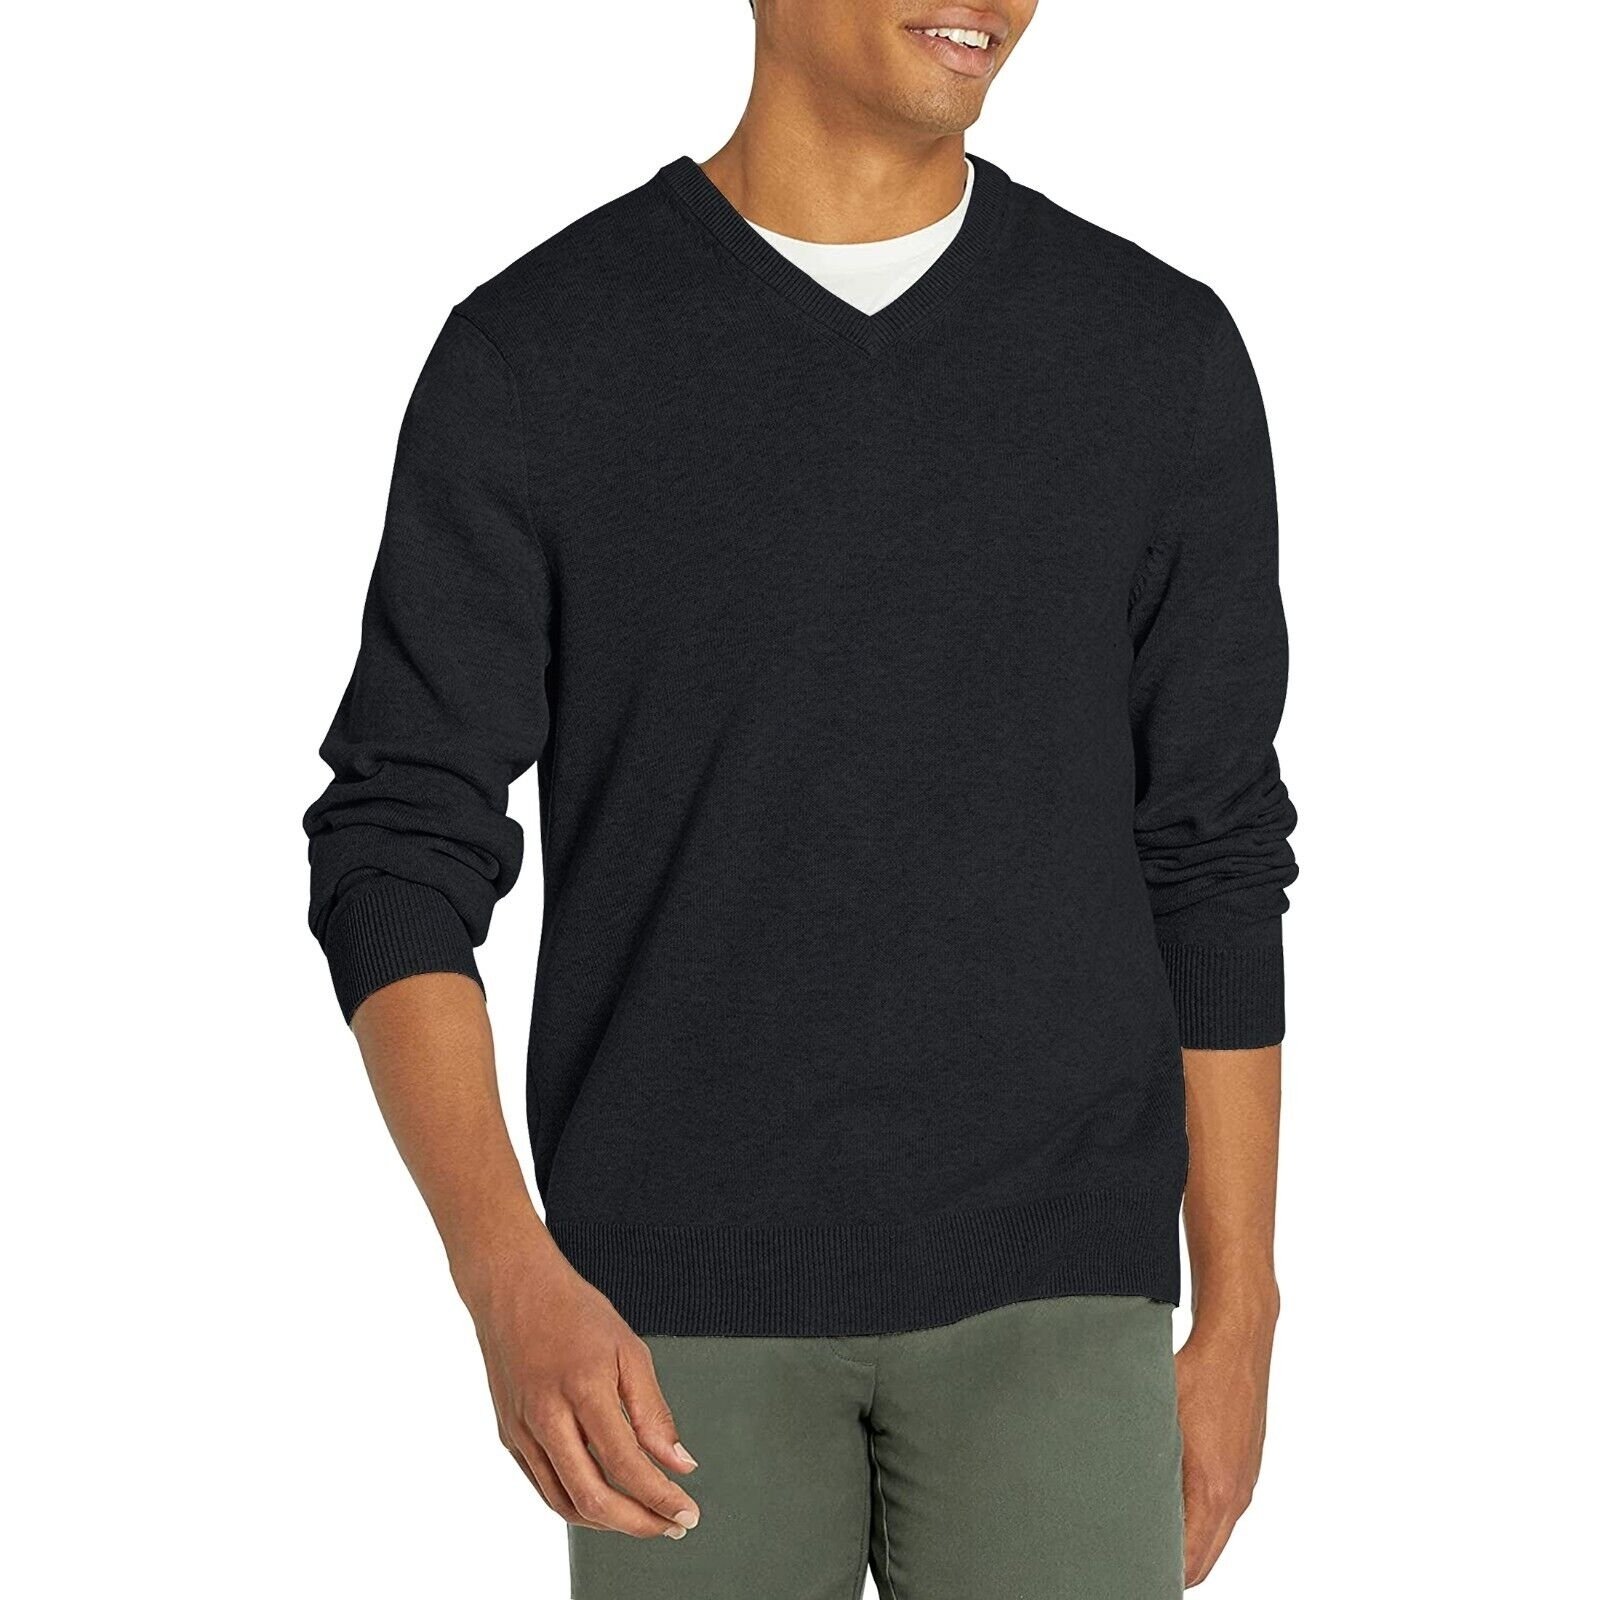 Men's Casual Ultra-Soft Slim Fit Warm Knit Pullover V-Neck Sweater For Winter - Brown, XX-Large